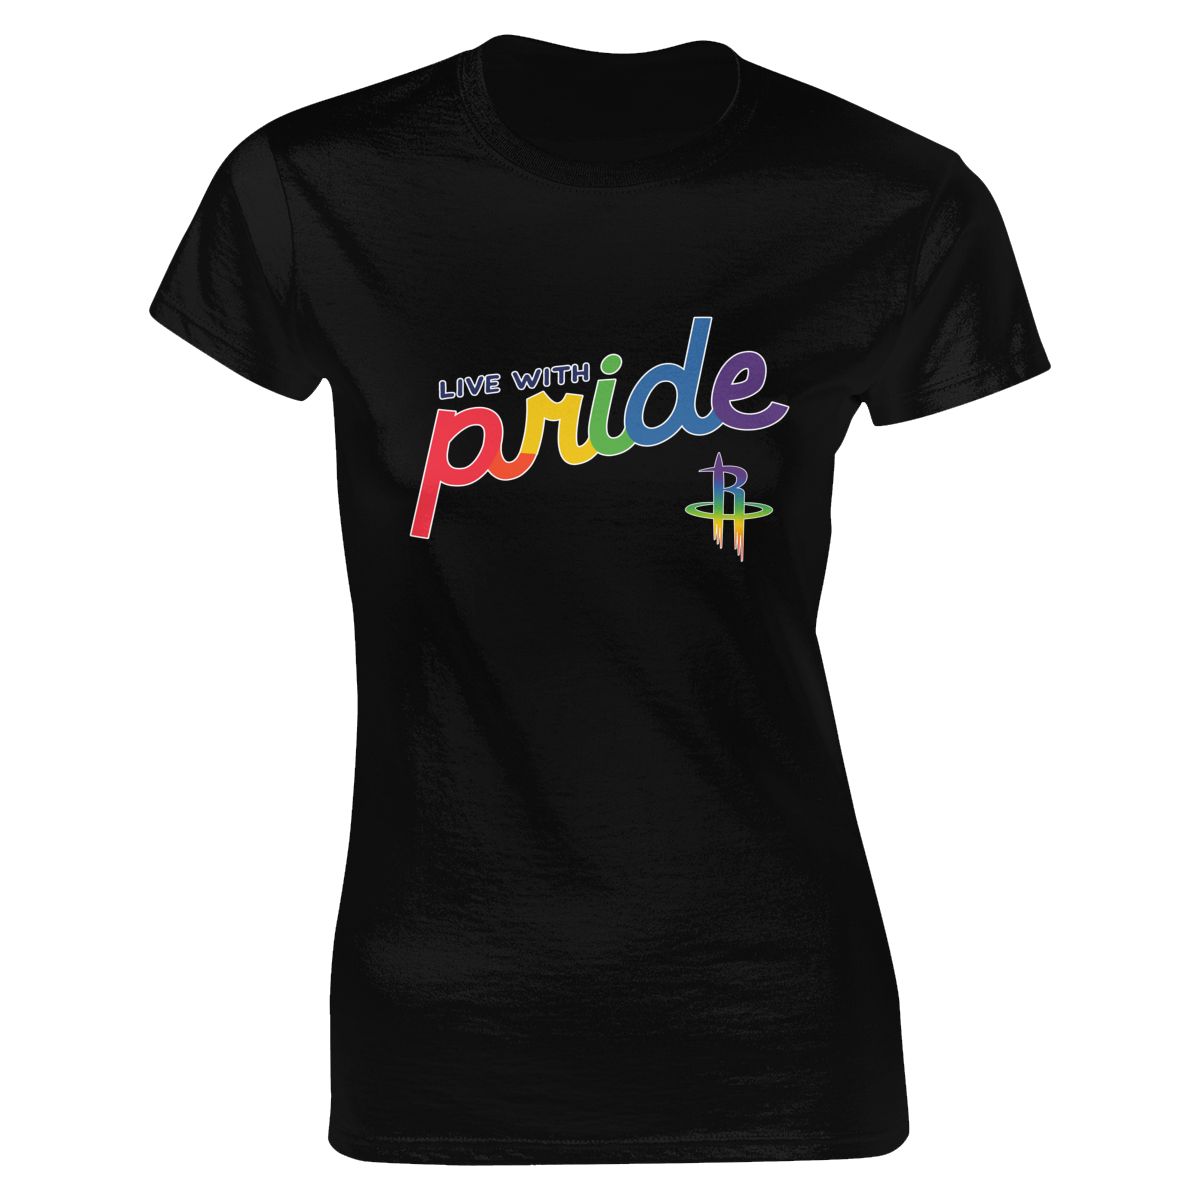 Houston Rockets Live With Pride Women's Classic-Fit T-Shirt